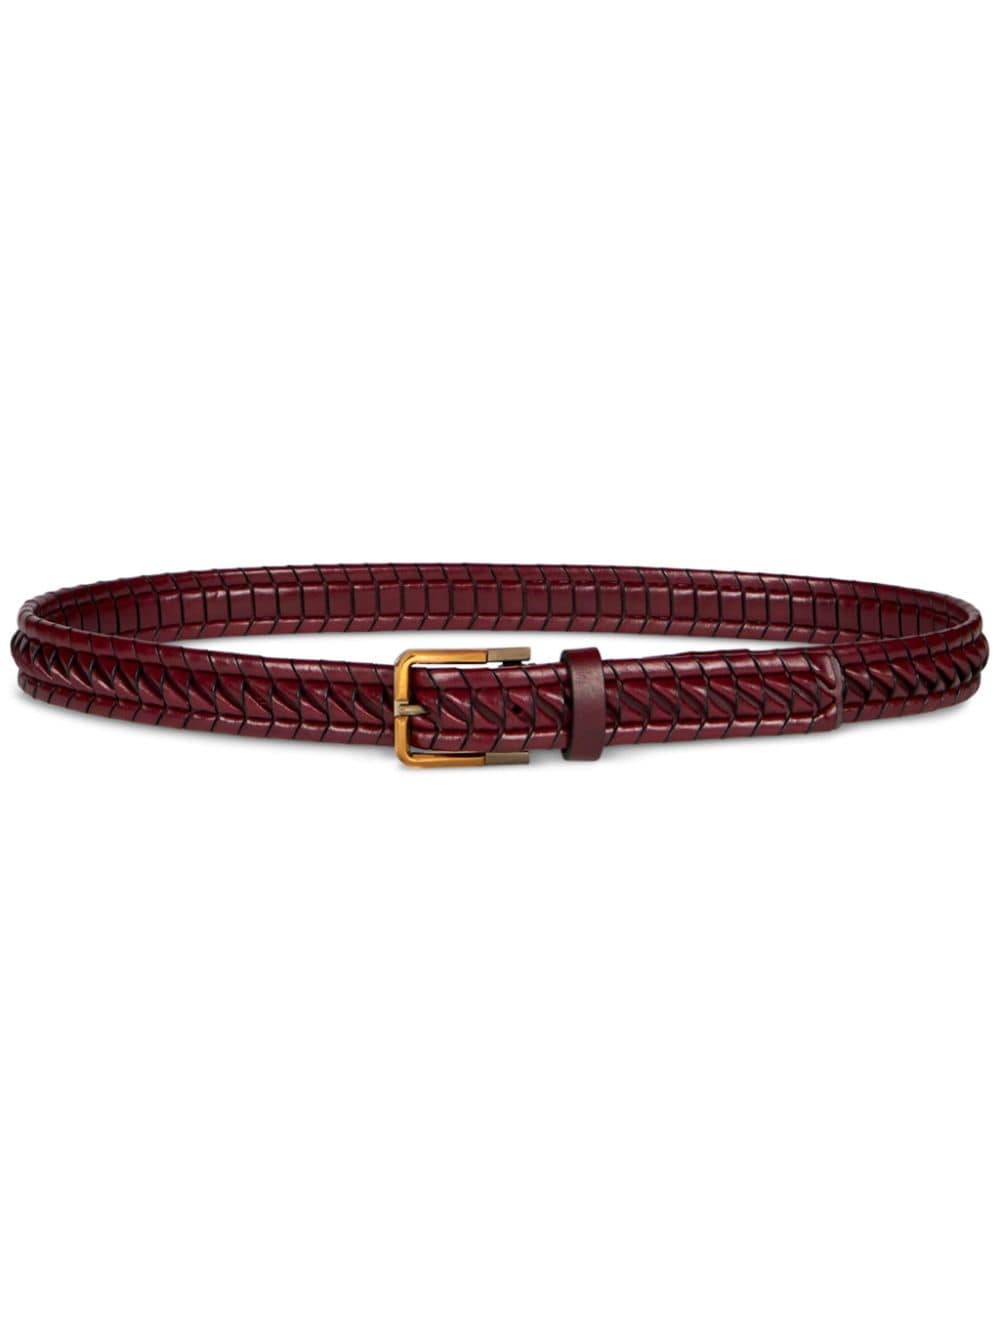 Etro Woven Leather Belt In Brown